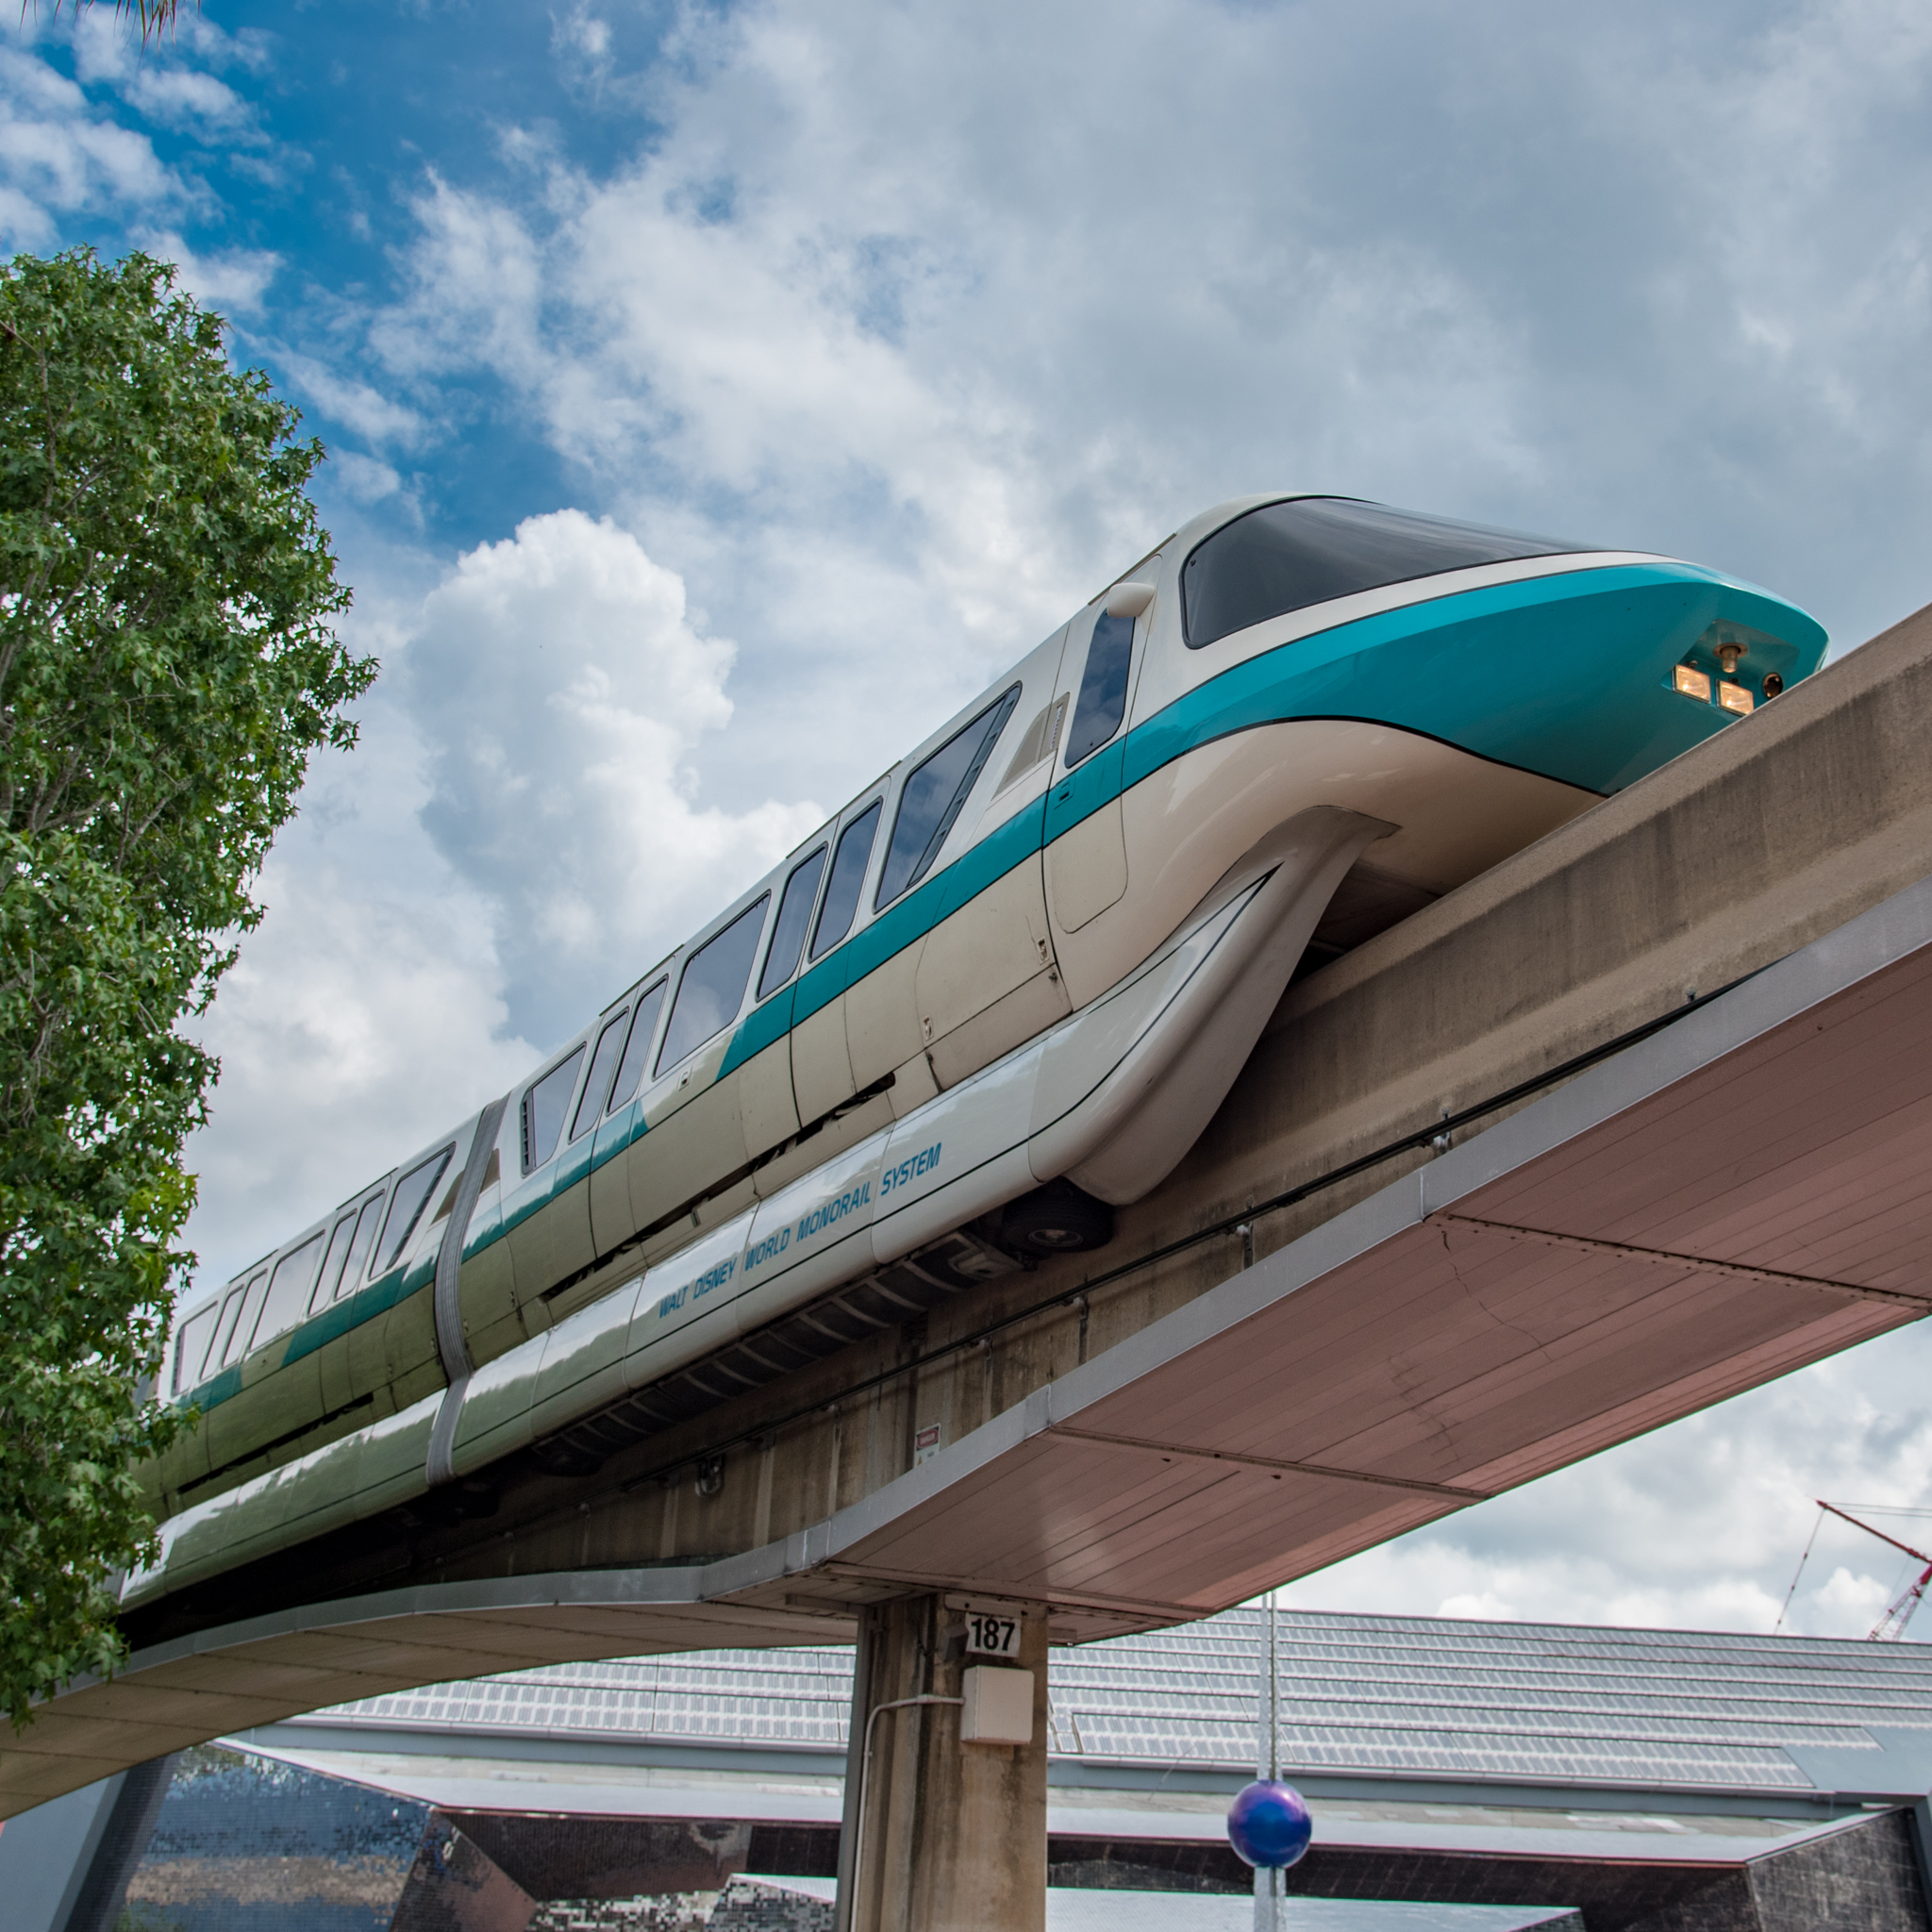 Art for Monorail (Please Stand Clear) by Walt Disney World